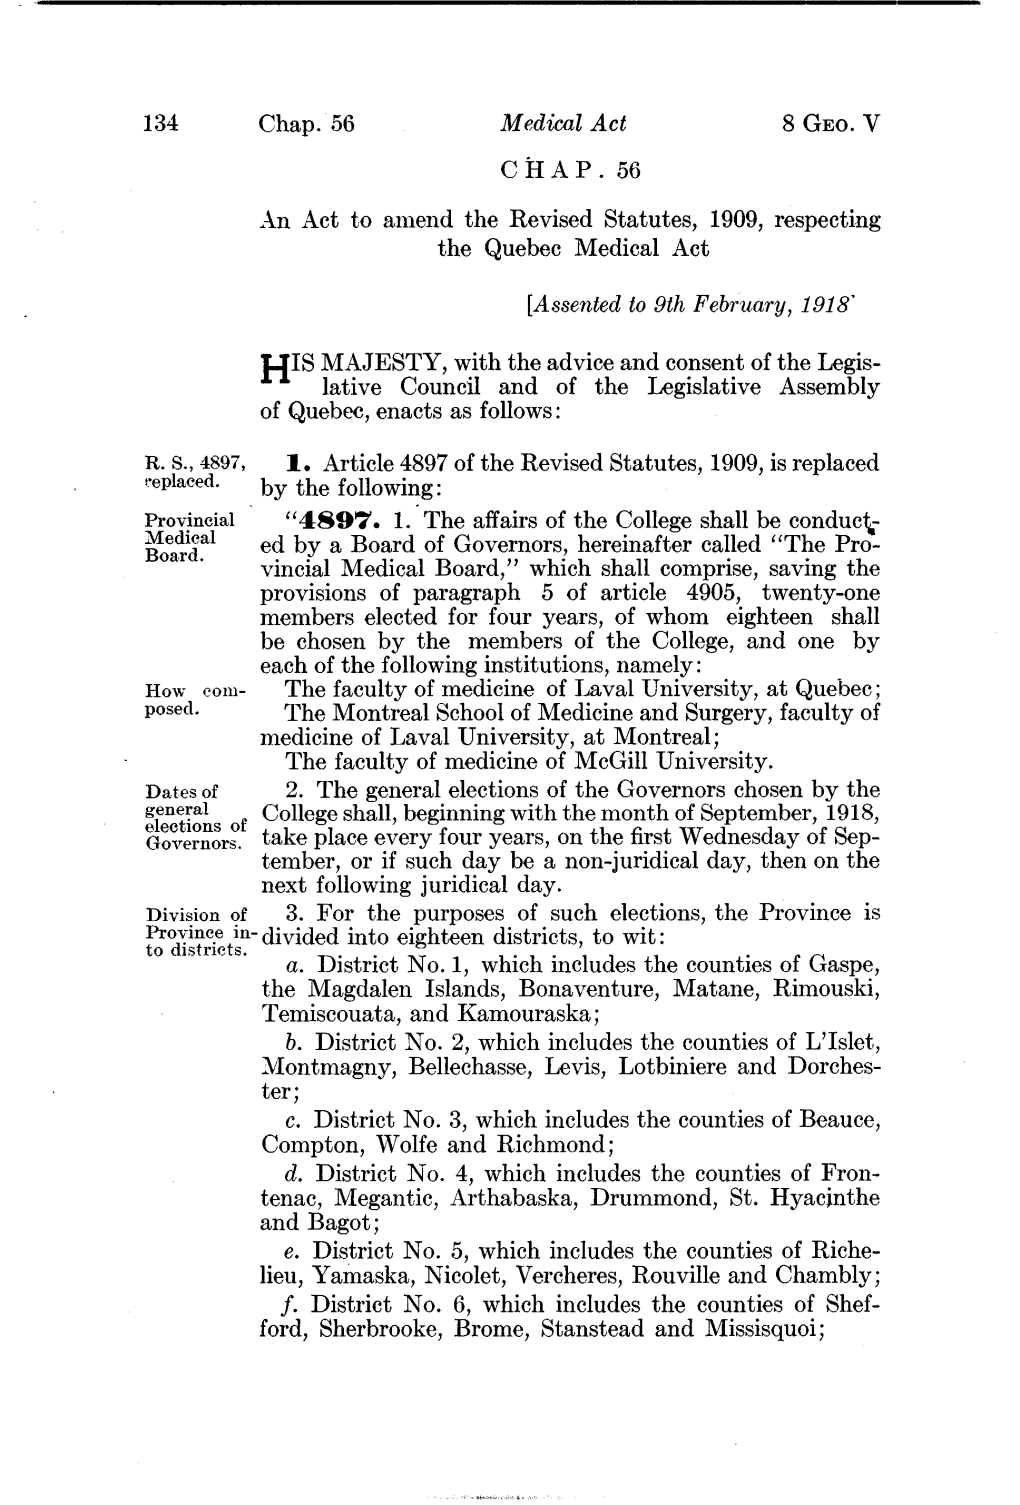 134 Chap. 56 Medical Act CHAP. 56 an Act to Amend the Revised Statutes, 1909, Respecting the Quebec Medical Act [Assented To